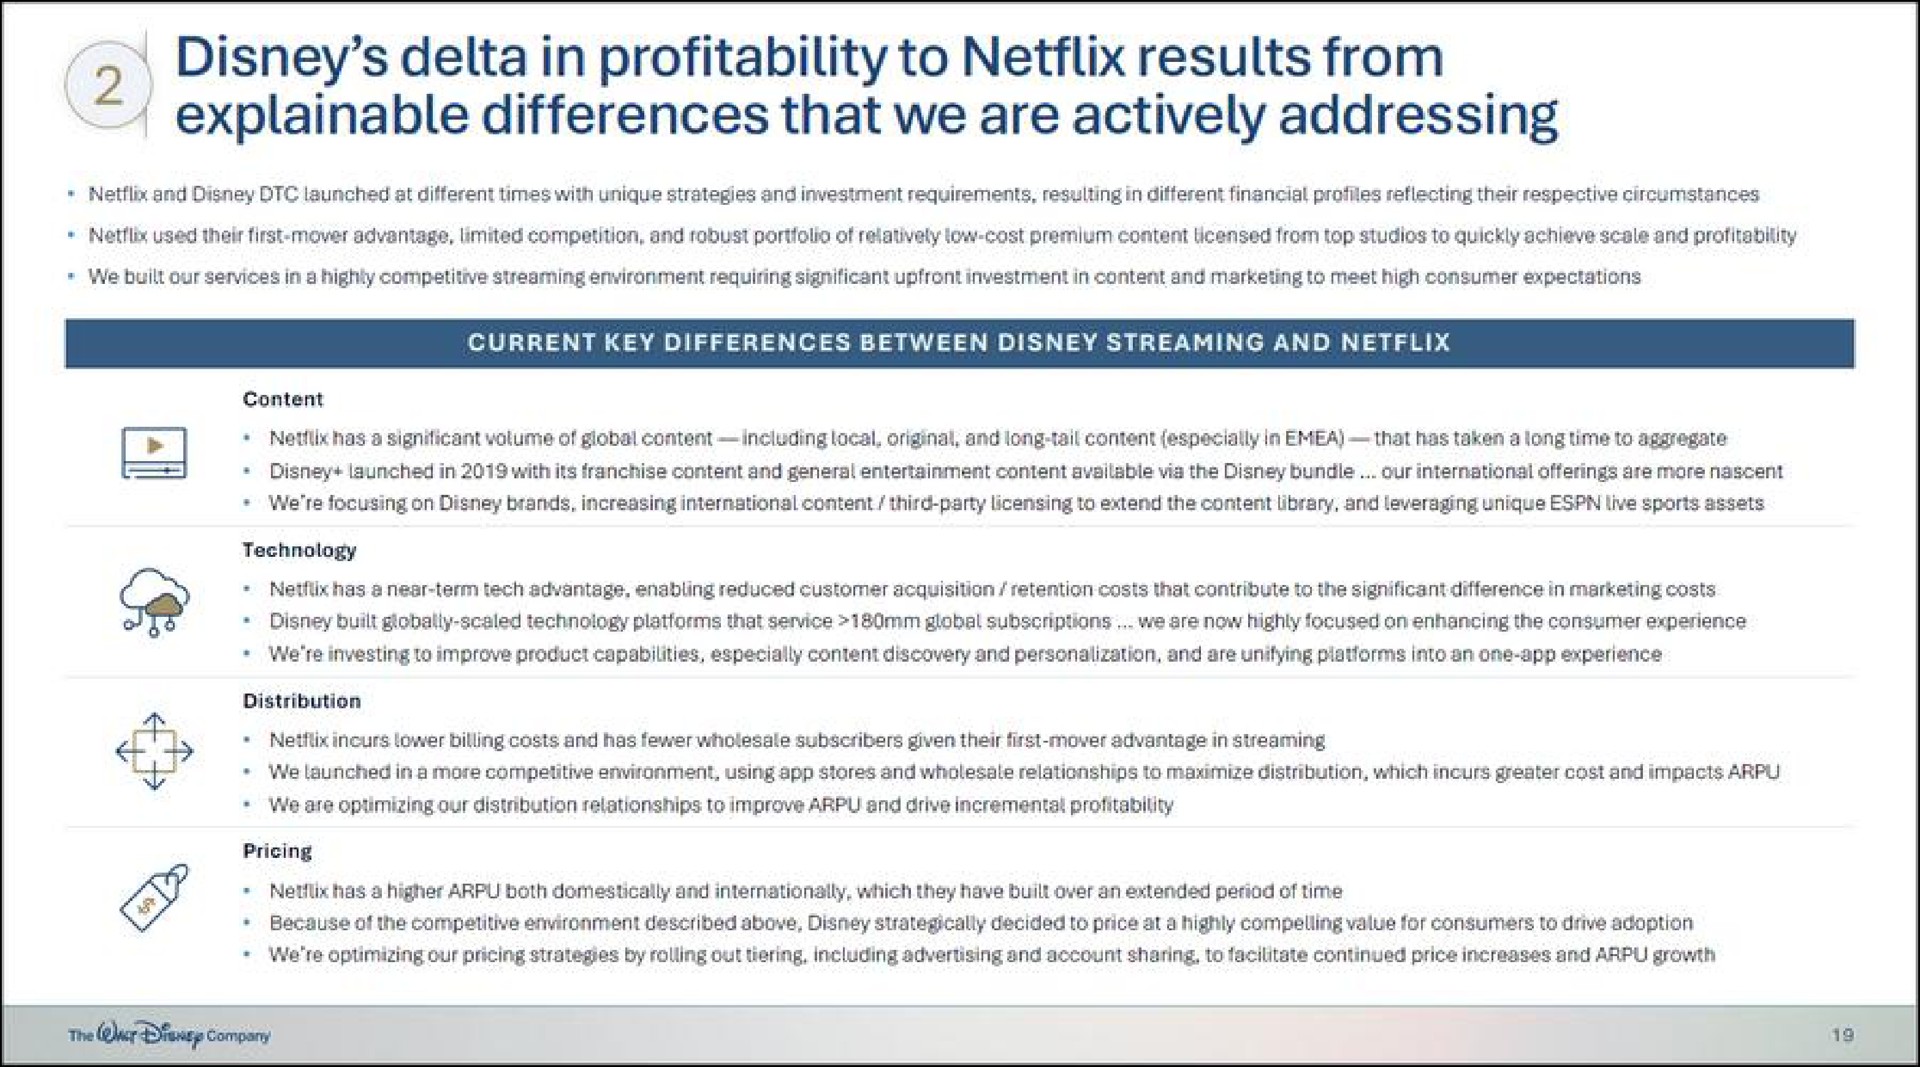 delta in profitability to results from explainable differences that we are actively addressing | Disney